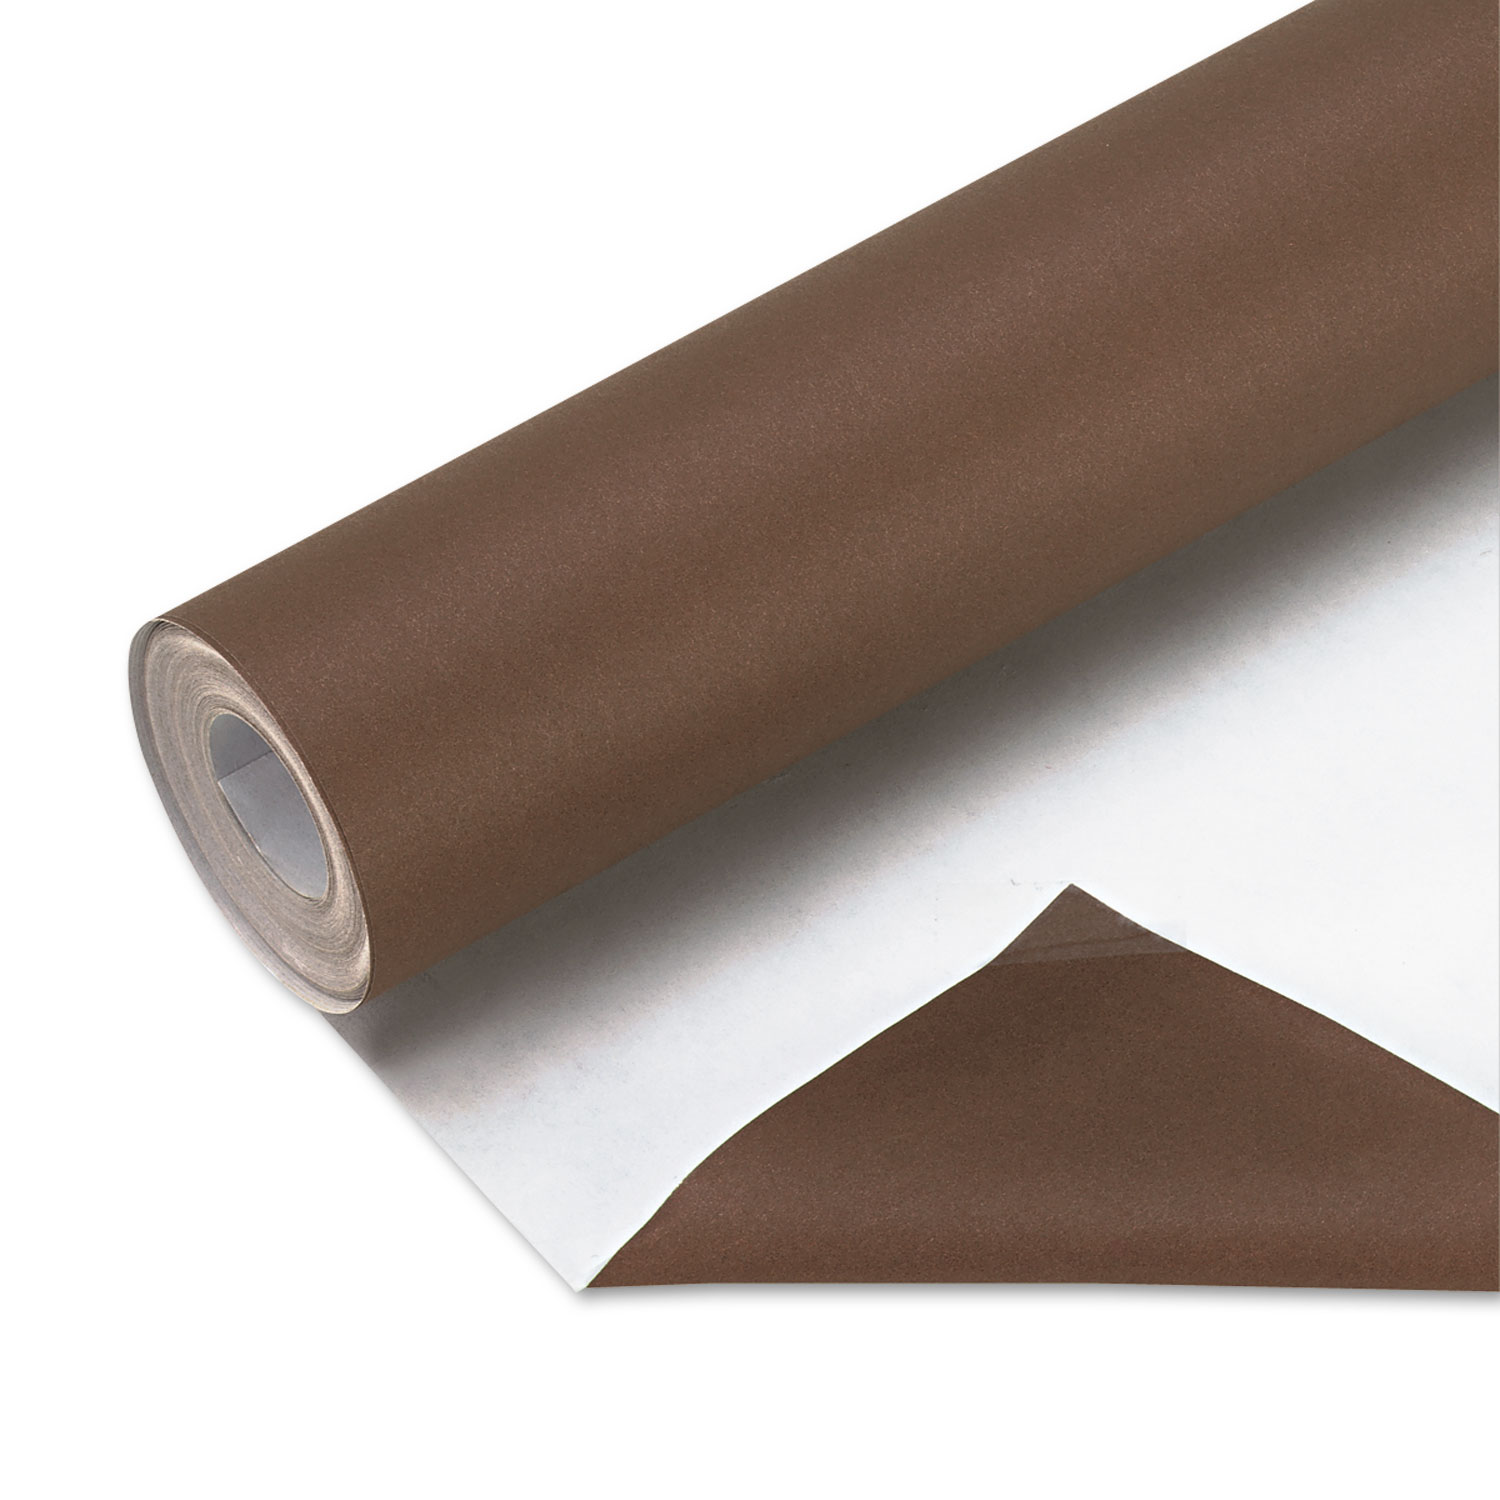  Pacon 57025 Fadeless Paper Roll, 50lb, 48 x 50ft, Brown (PAC57025) 